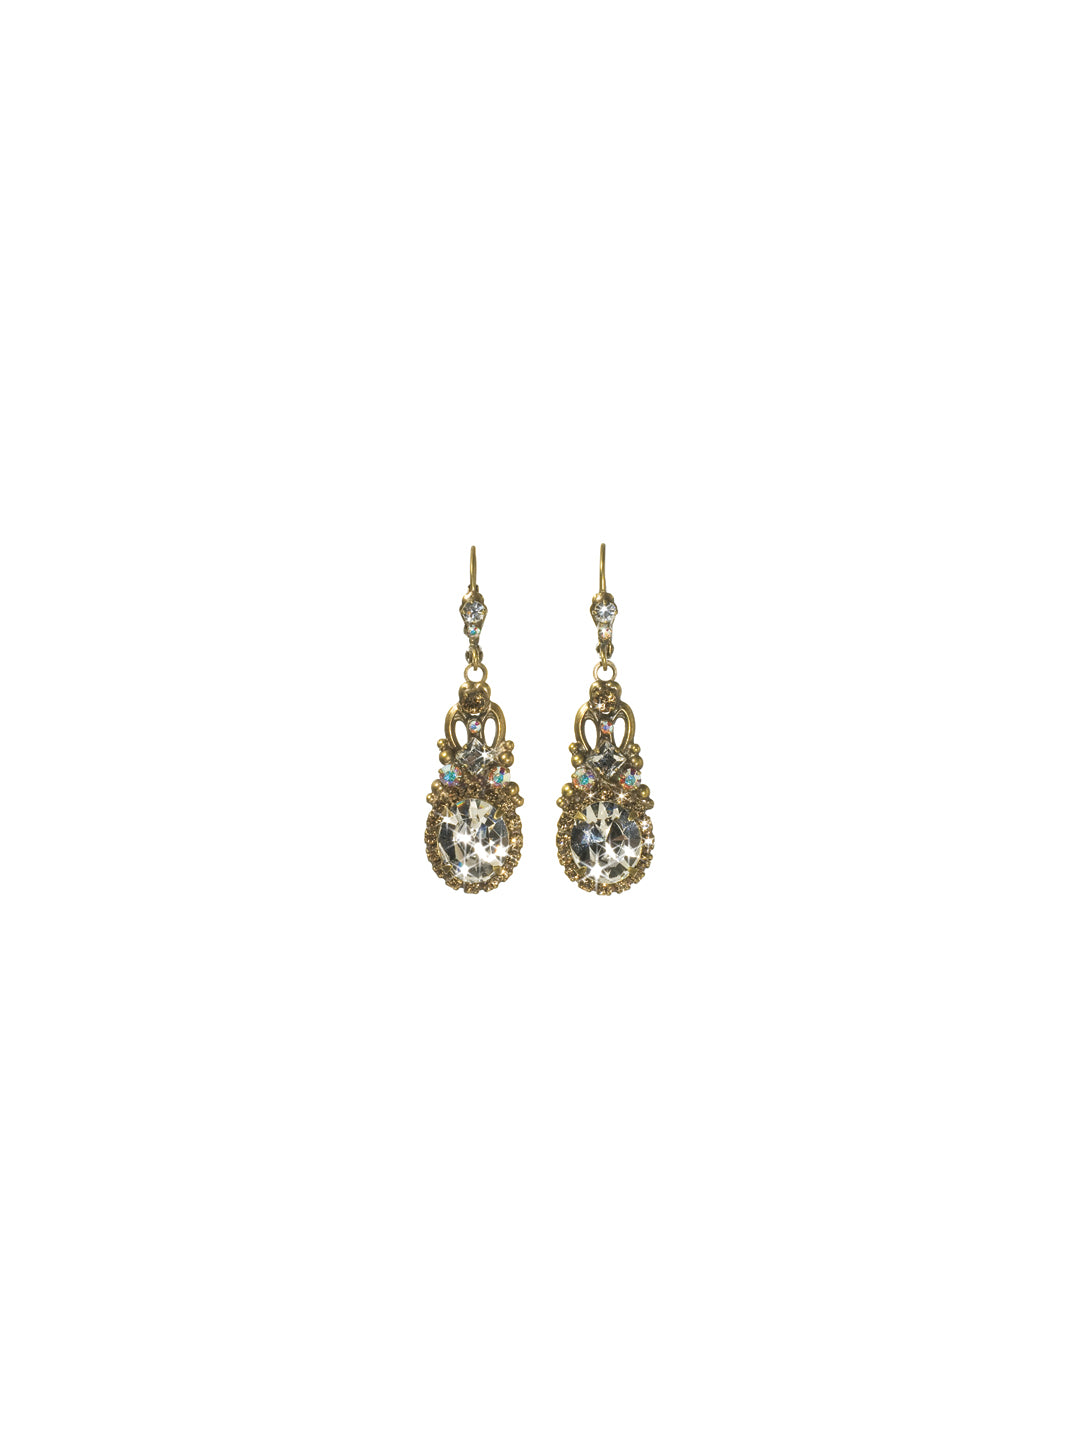 Stardust Drop Earring - ECJ8AGSDU - As enchanting as stardust, this delicate drop will add an element of whimsy to your look.